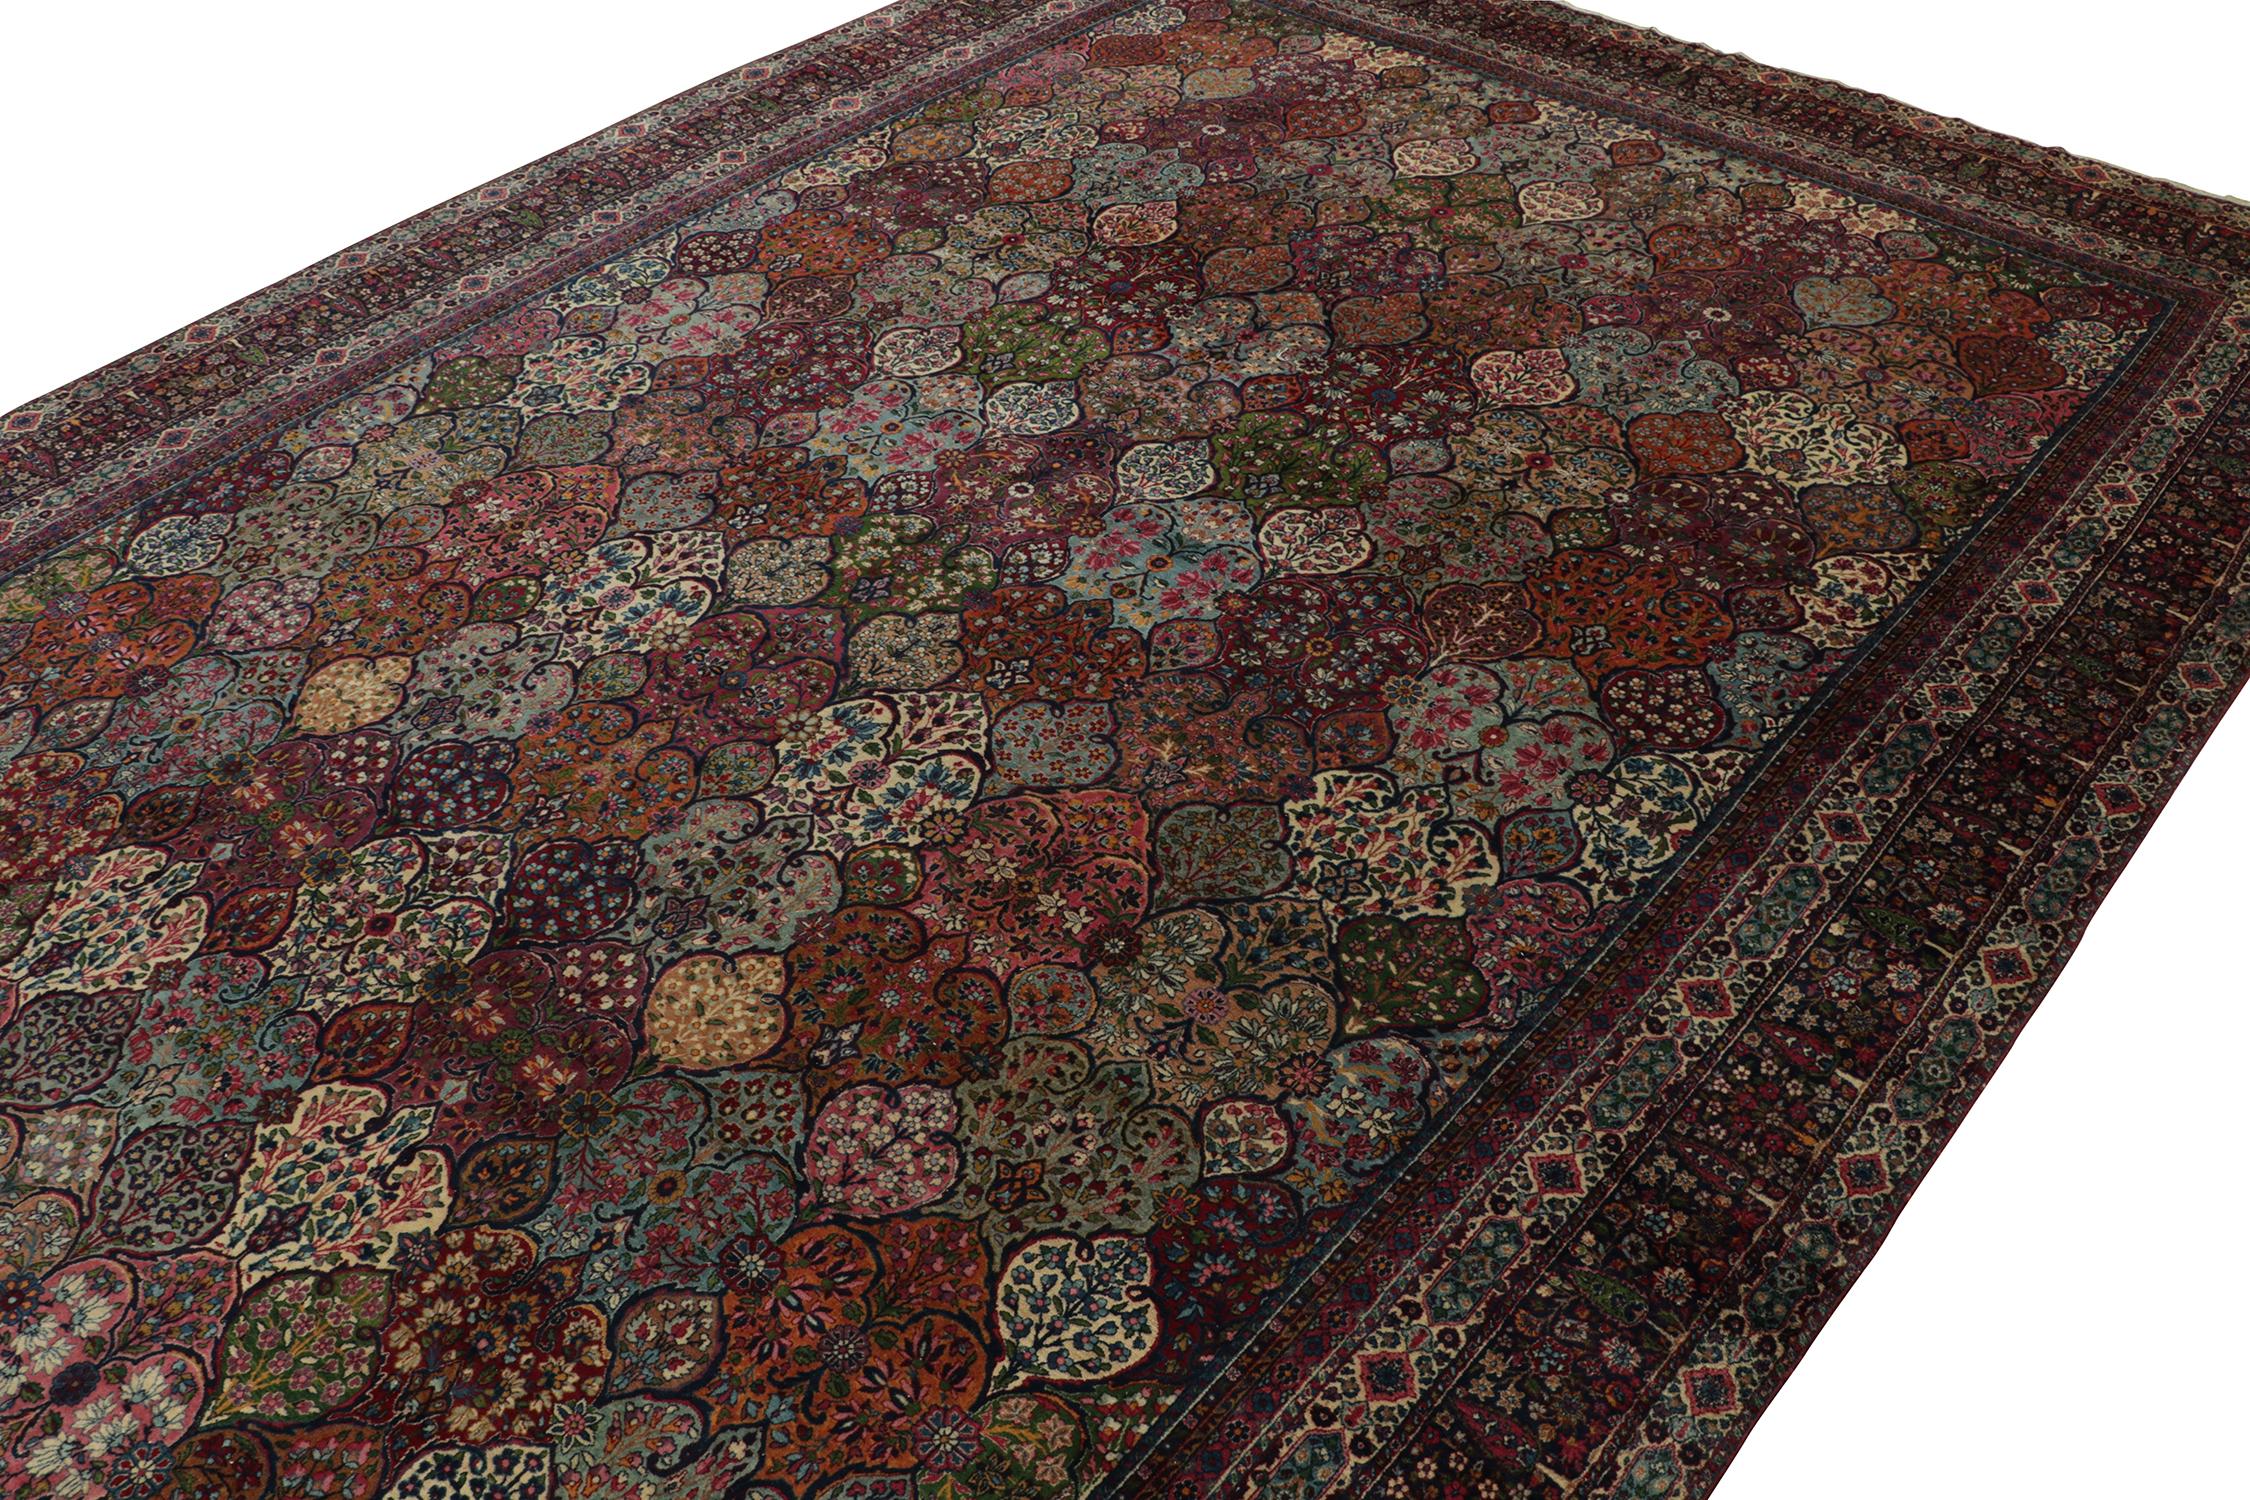 This antique 13x20 Persian rug is a rare palace-size selection of Yazd provenance. Hand-knotted in wool circa 1920-1940, and a new addition to Rug & Kilim’s finest classic curations. 

Further On the Design:

This palace rug is a royal selection